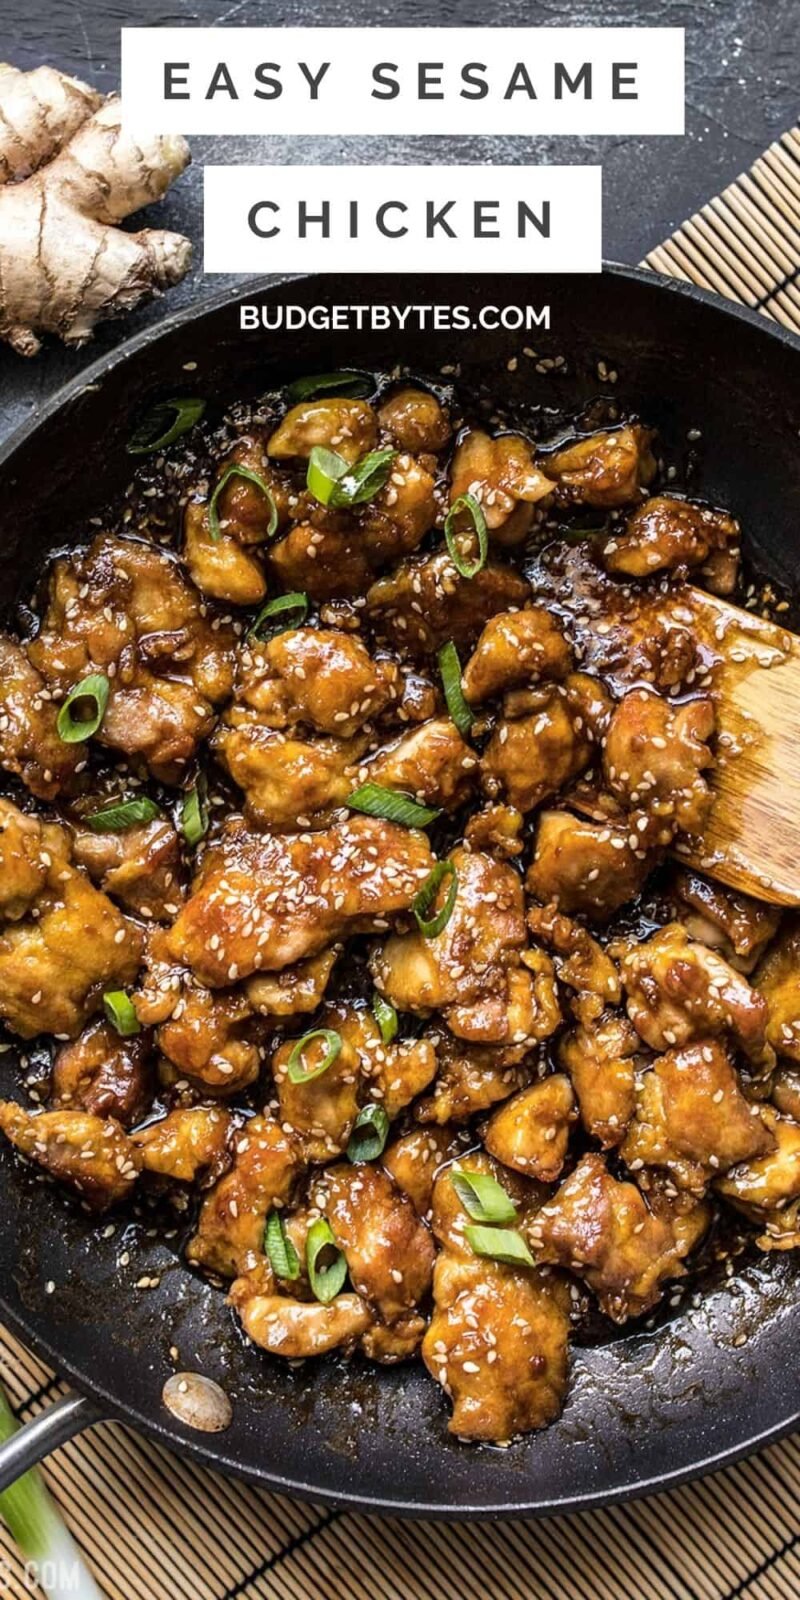 Overhead view of sesame chicken in a skillet, title text at the top